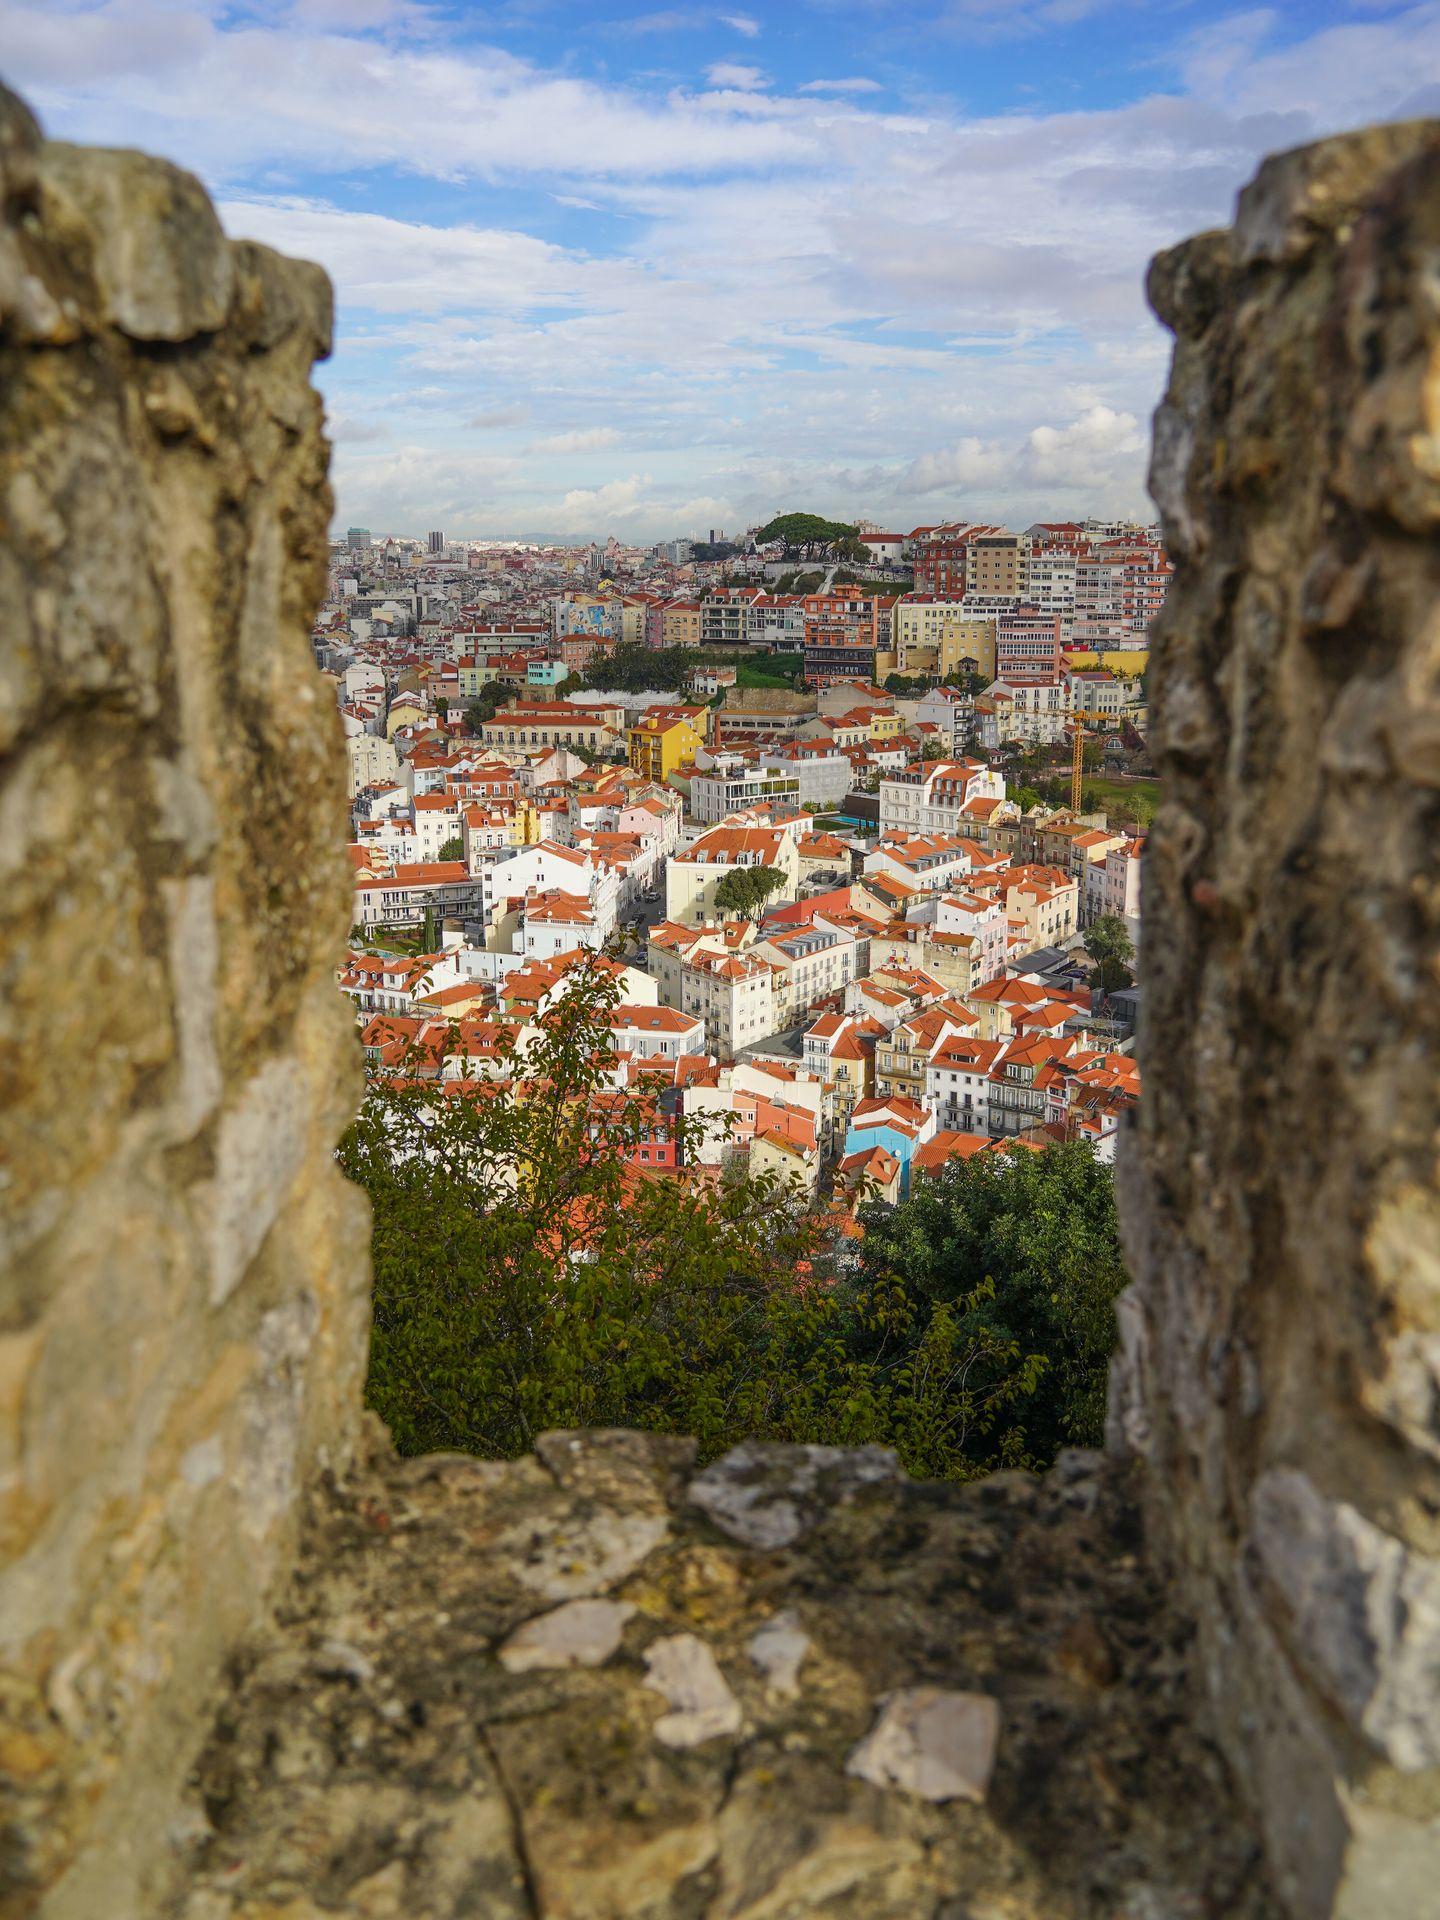 Looking through the castle walls at the city of Lisbon